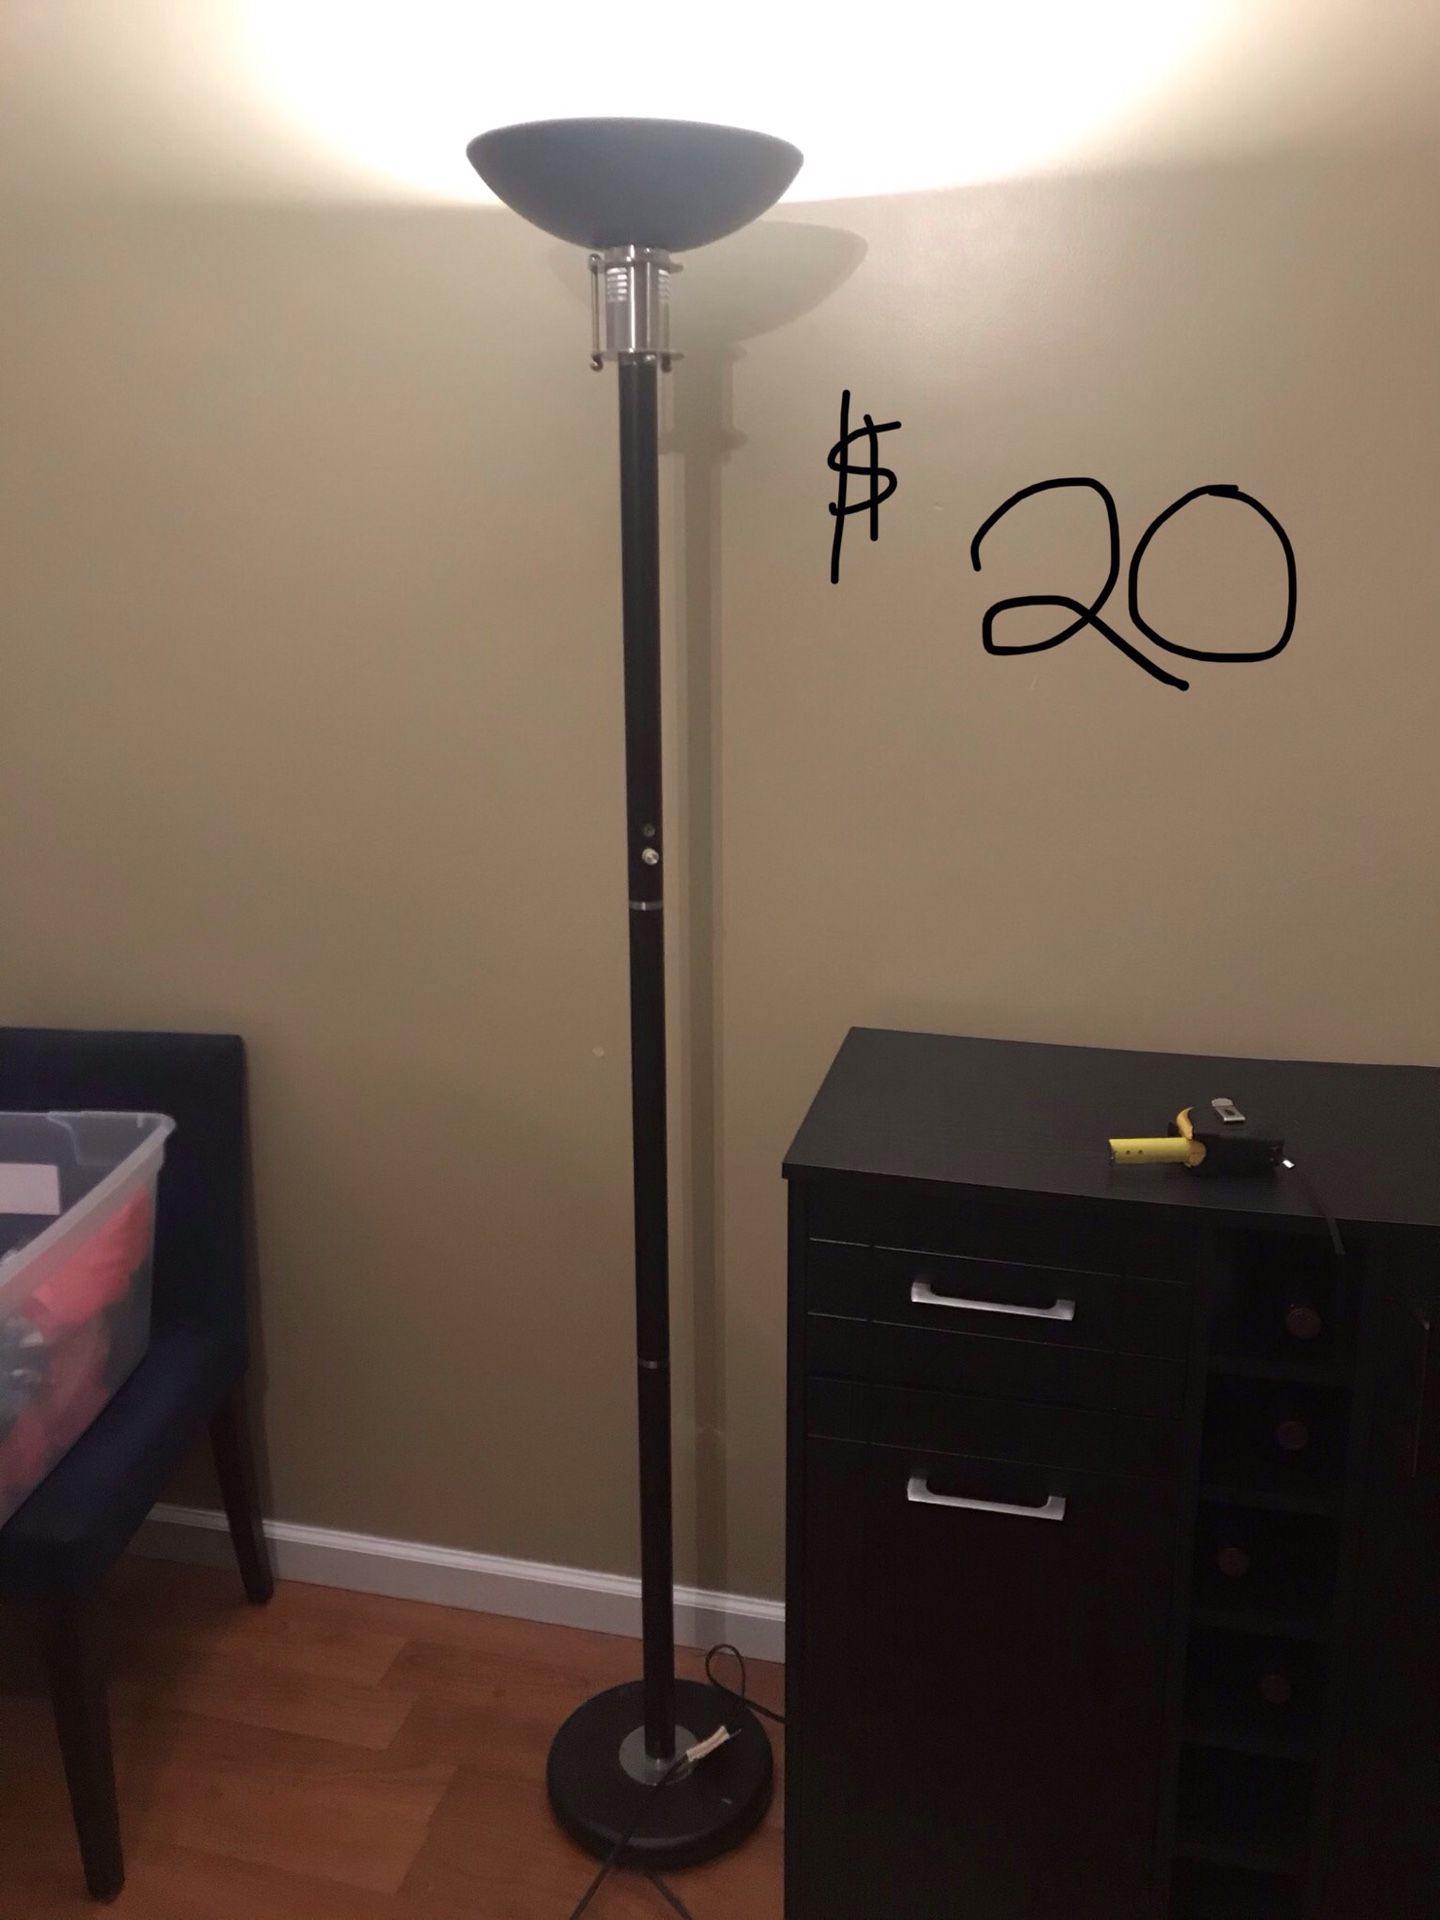 6 foot floor lamp with dimmer for brightness